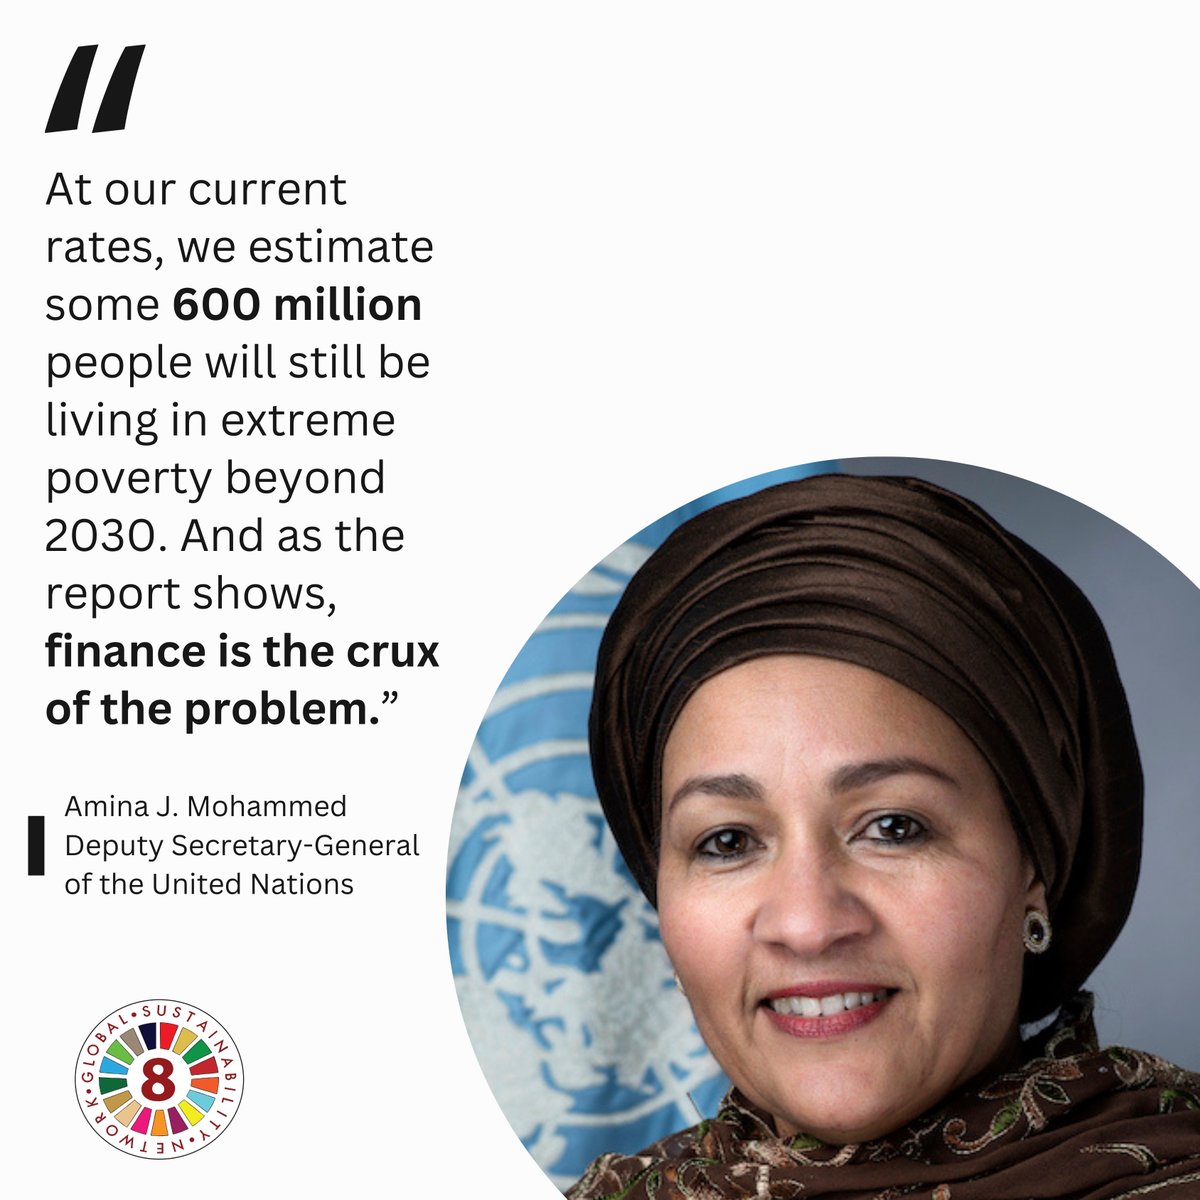 Highlighting a financial crisis at the heart of global development challenges, Deputy Secretary-General Amina J. Mohammed calls for an intensified global effort to close the investment gap.